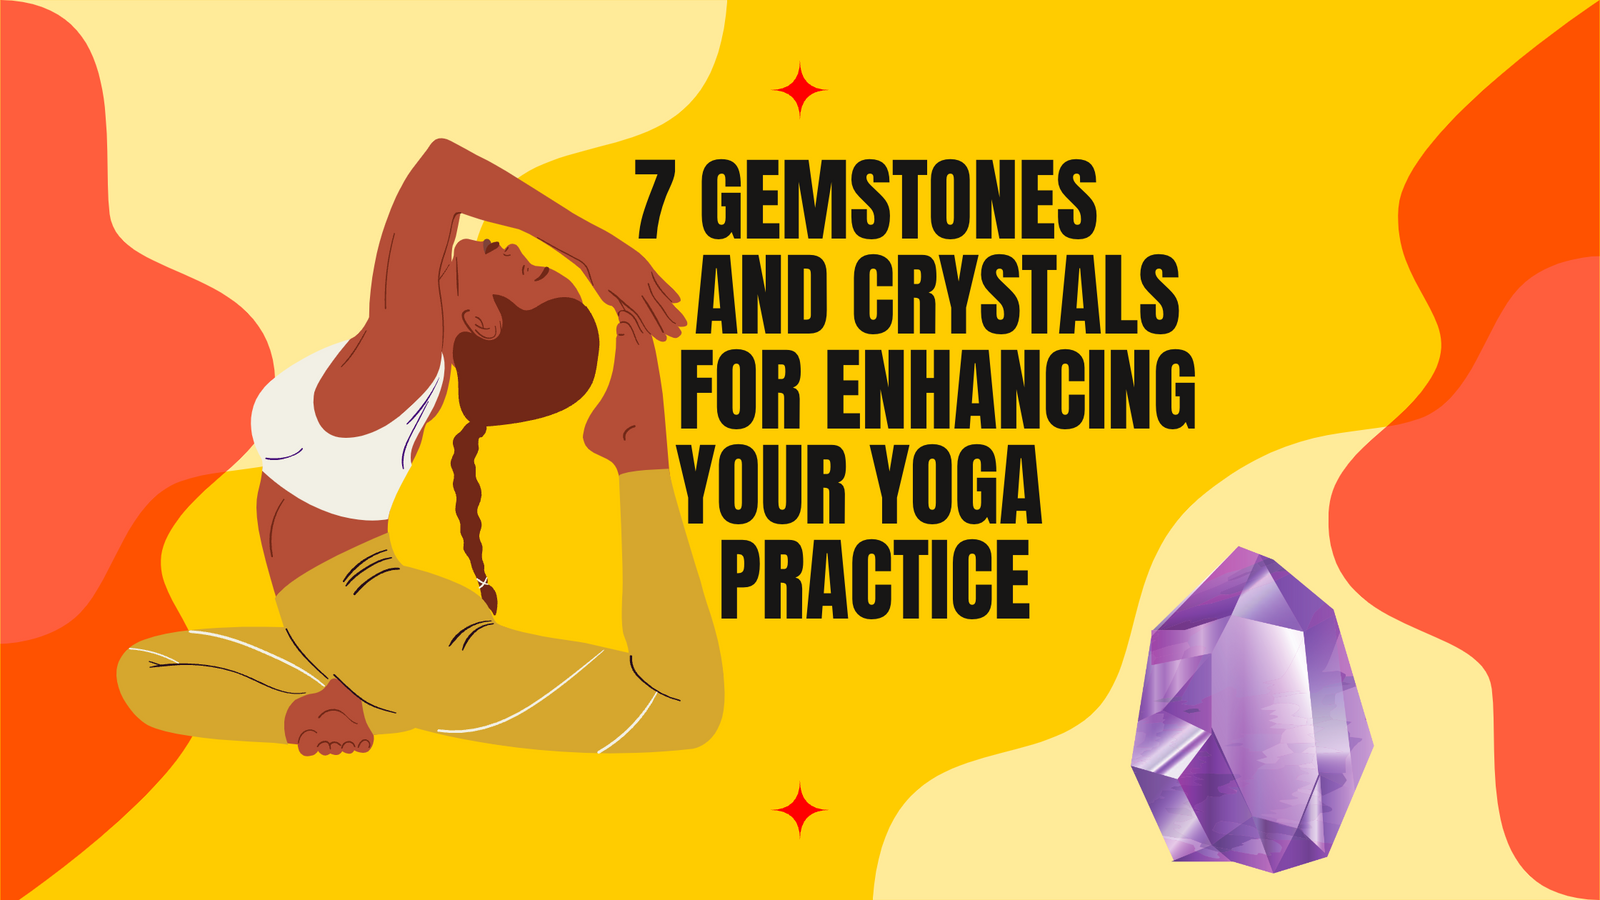 7 Gemstones and Crystals for Enhancing Your Yoga Practice